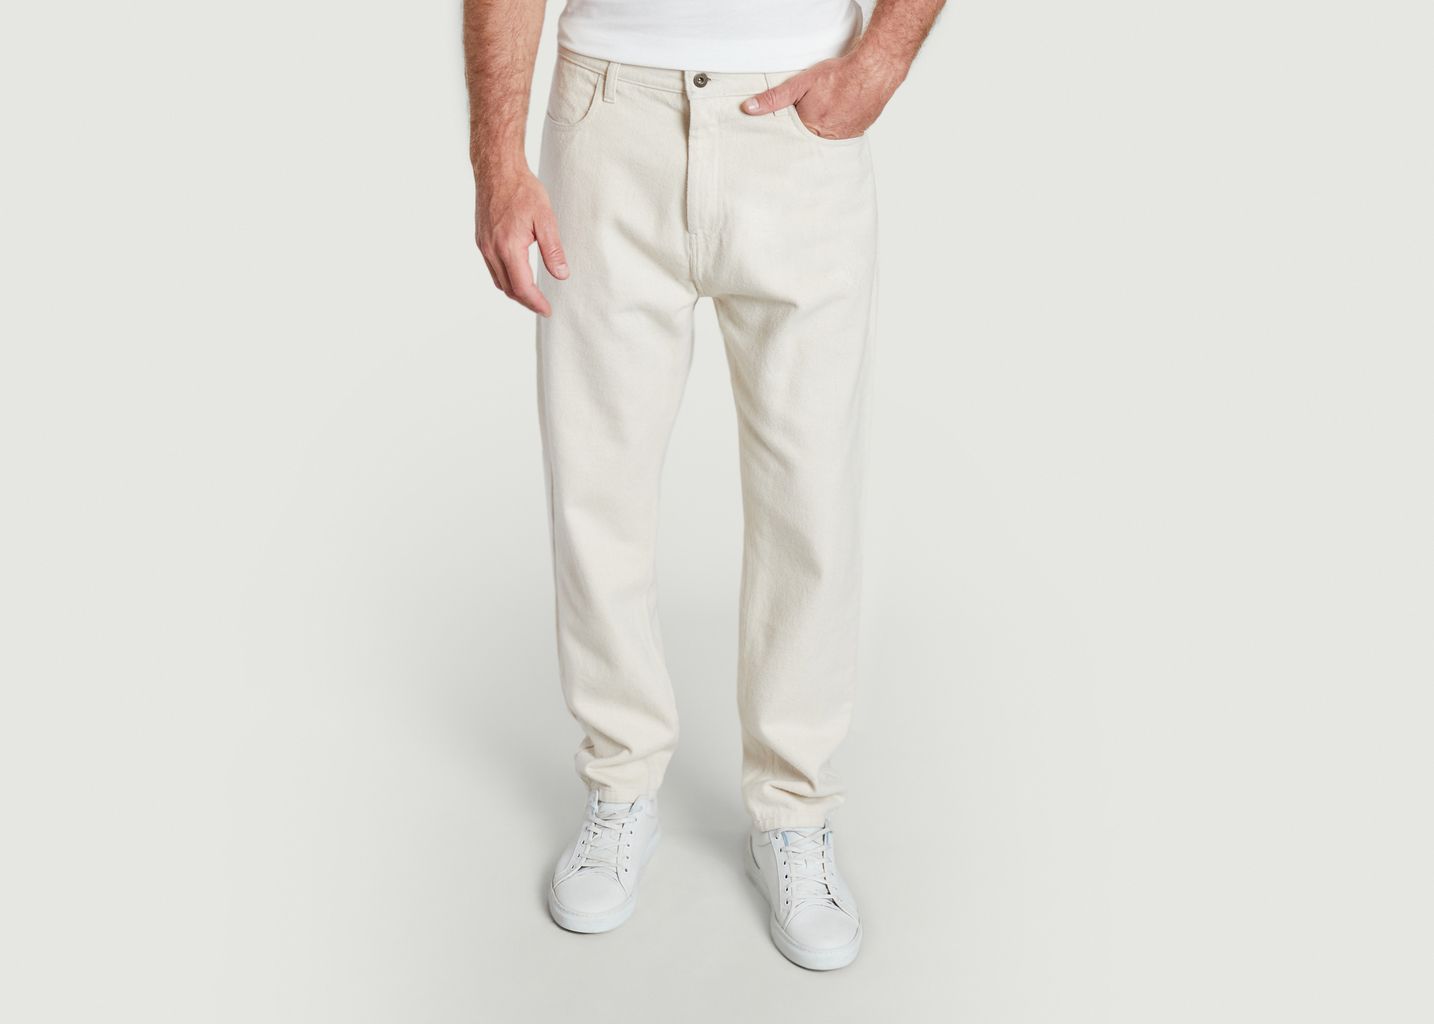 OLOW Jacquot Trousers